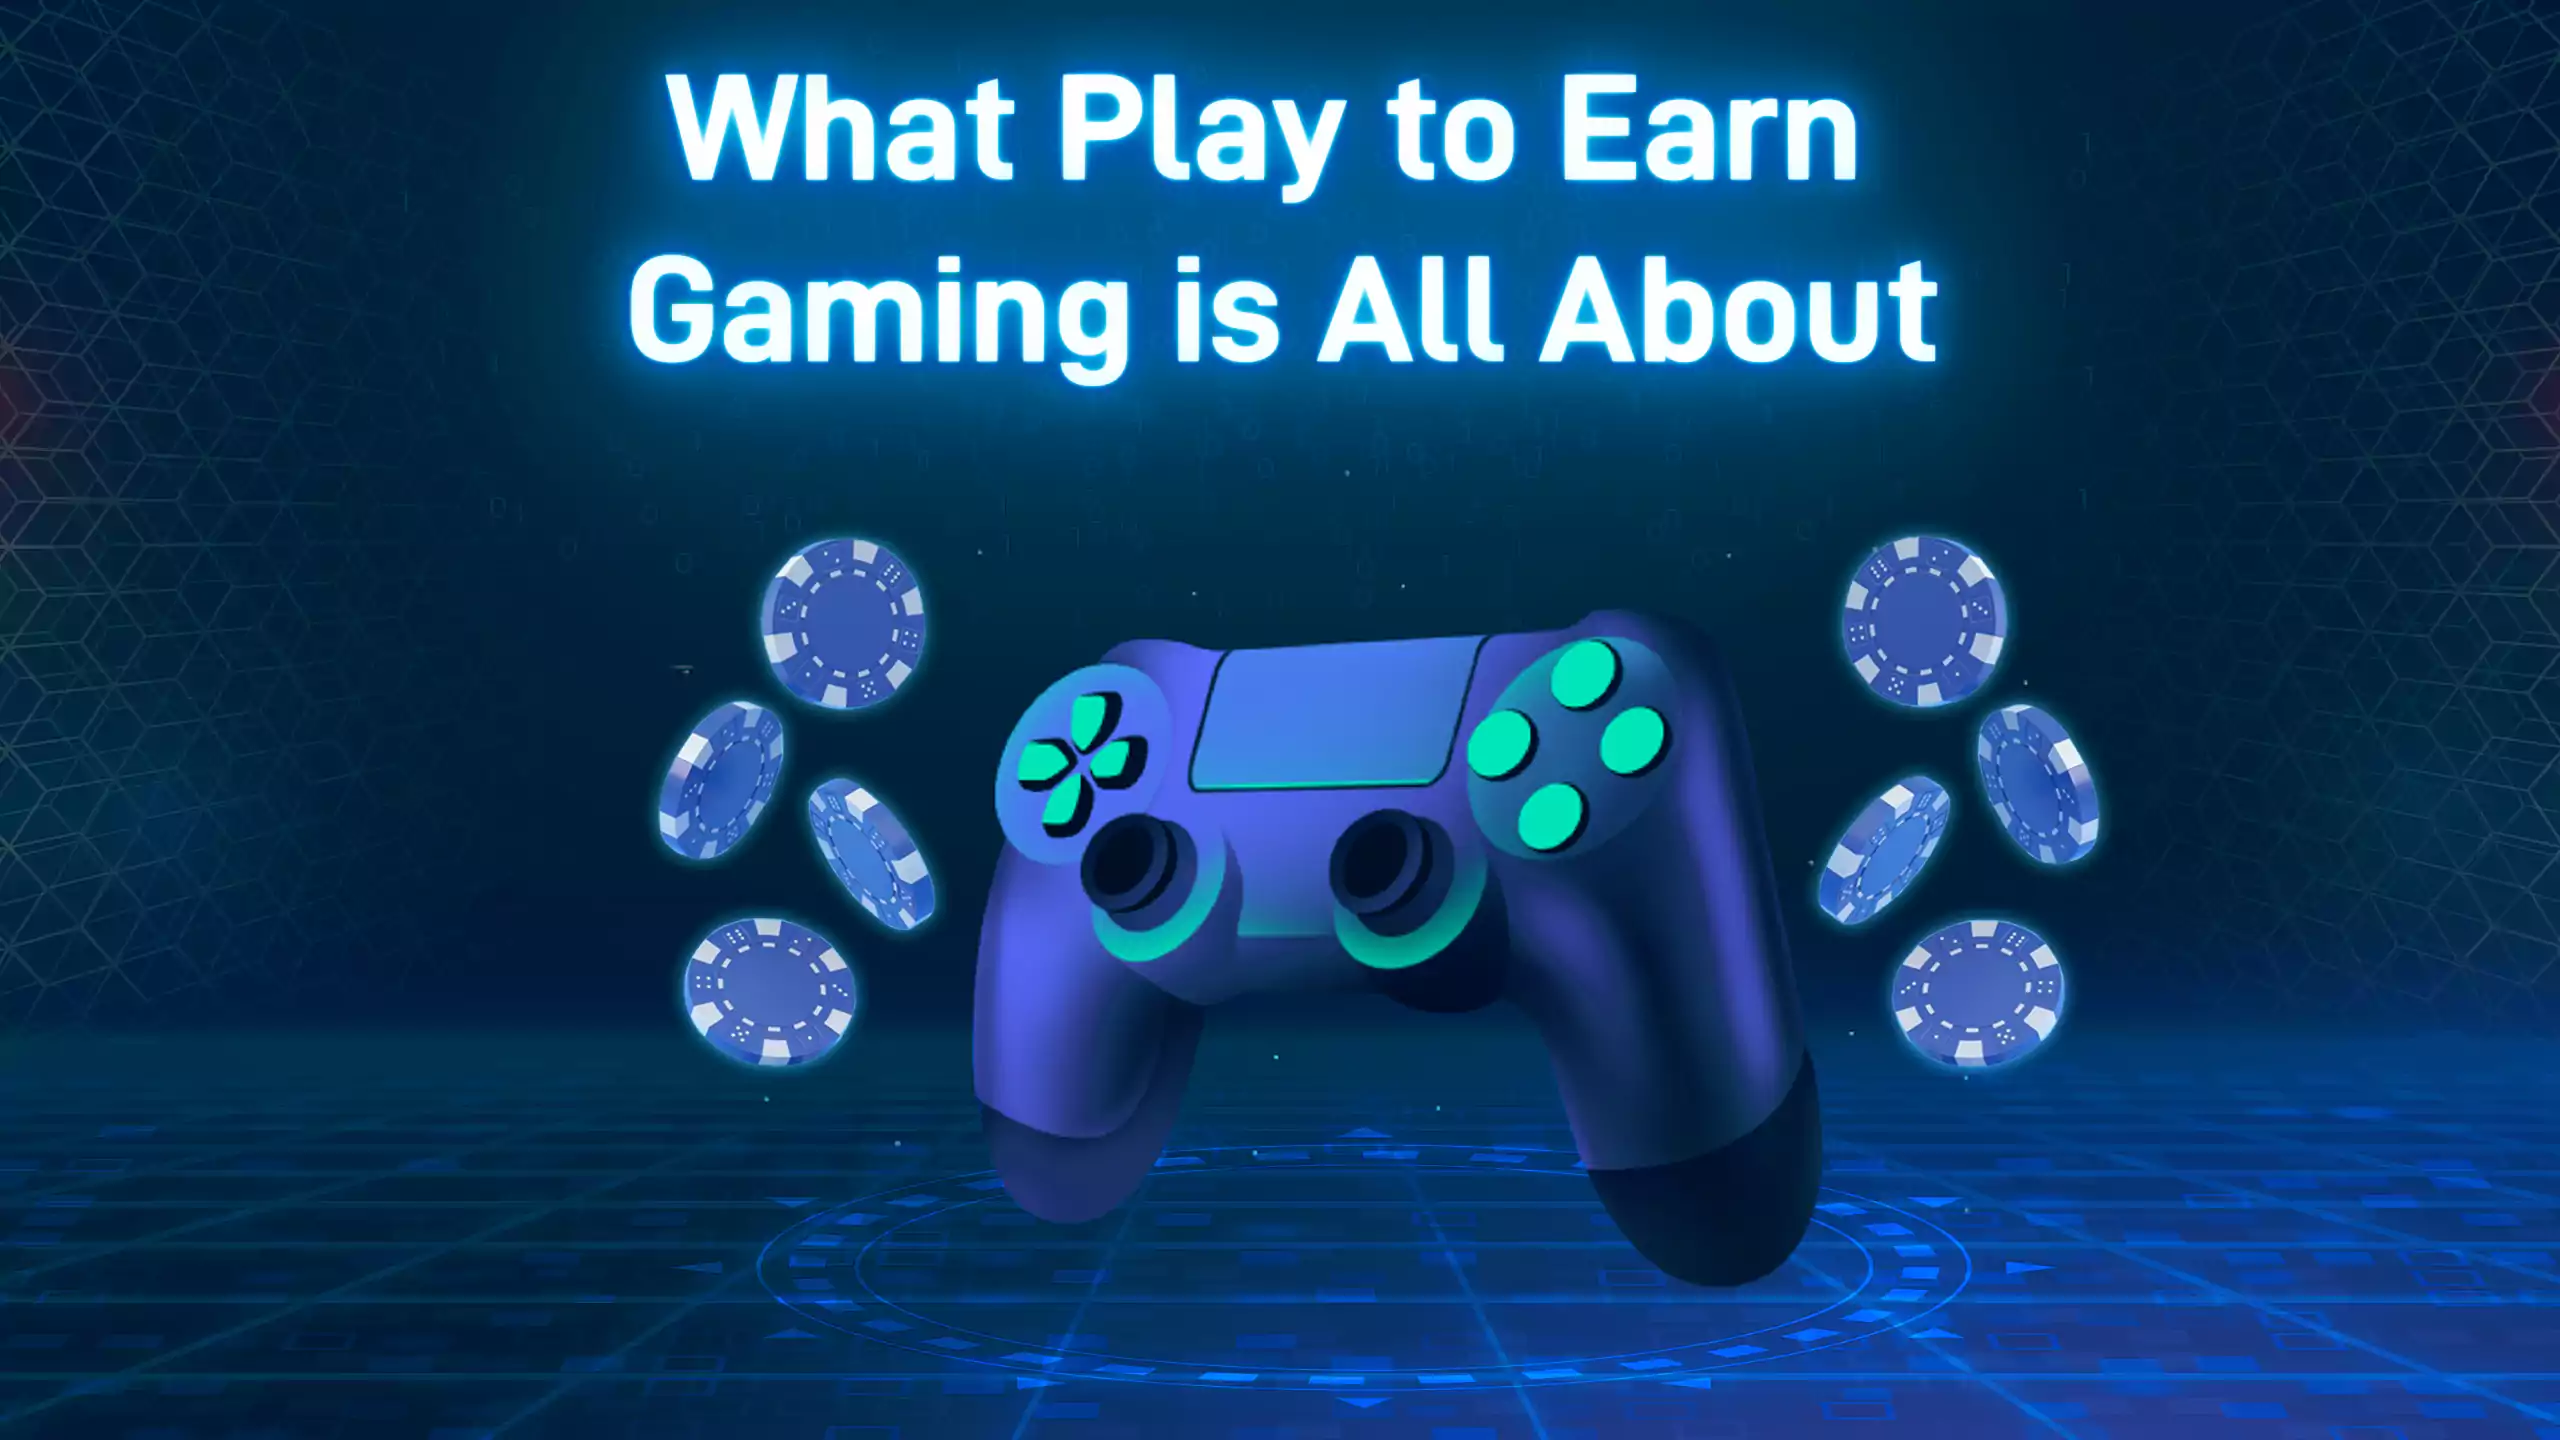 What Play to Earn Gaming is All About